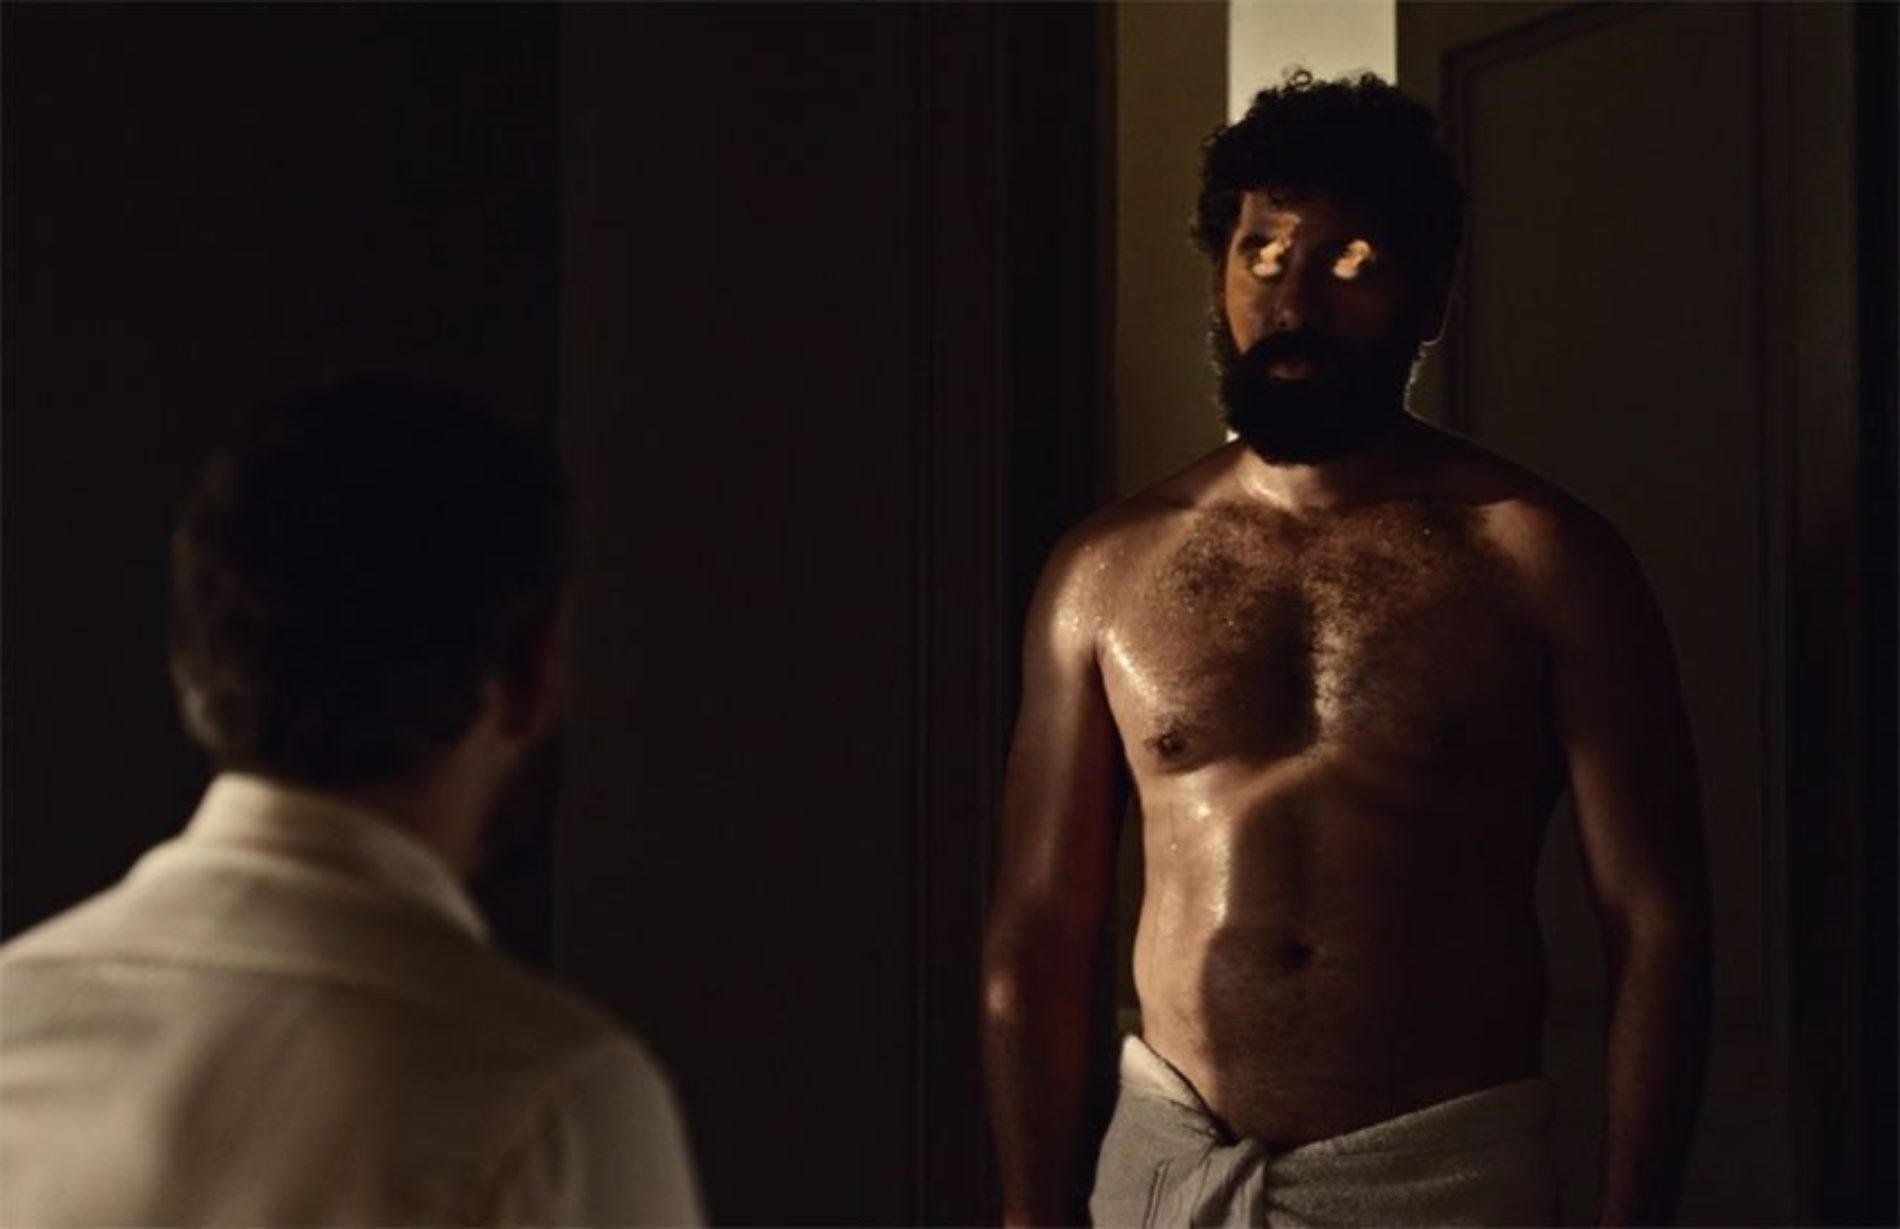 American Gods: See images and video from the most explicit gay sex scene ever shown on TV